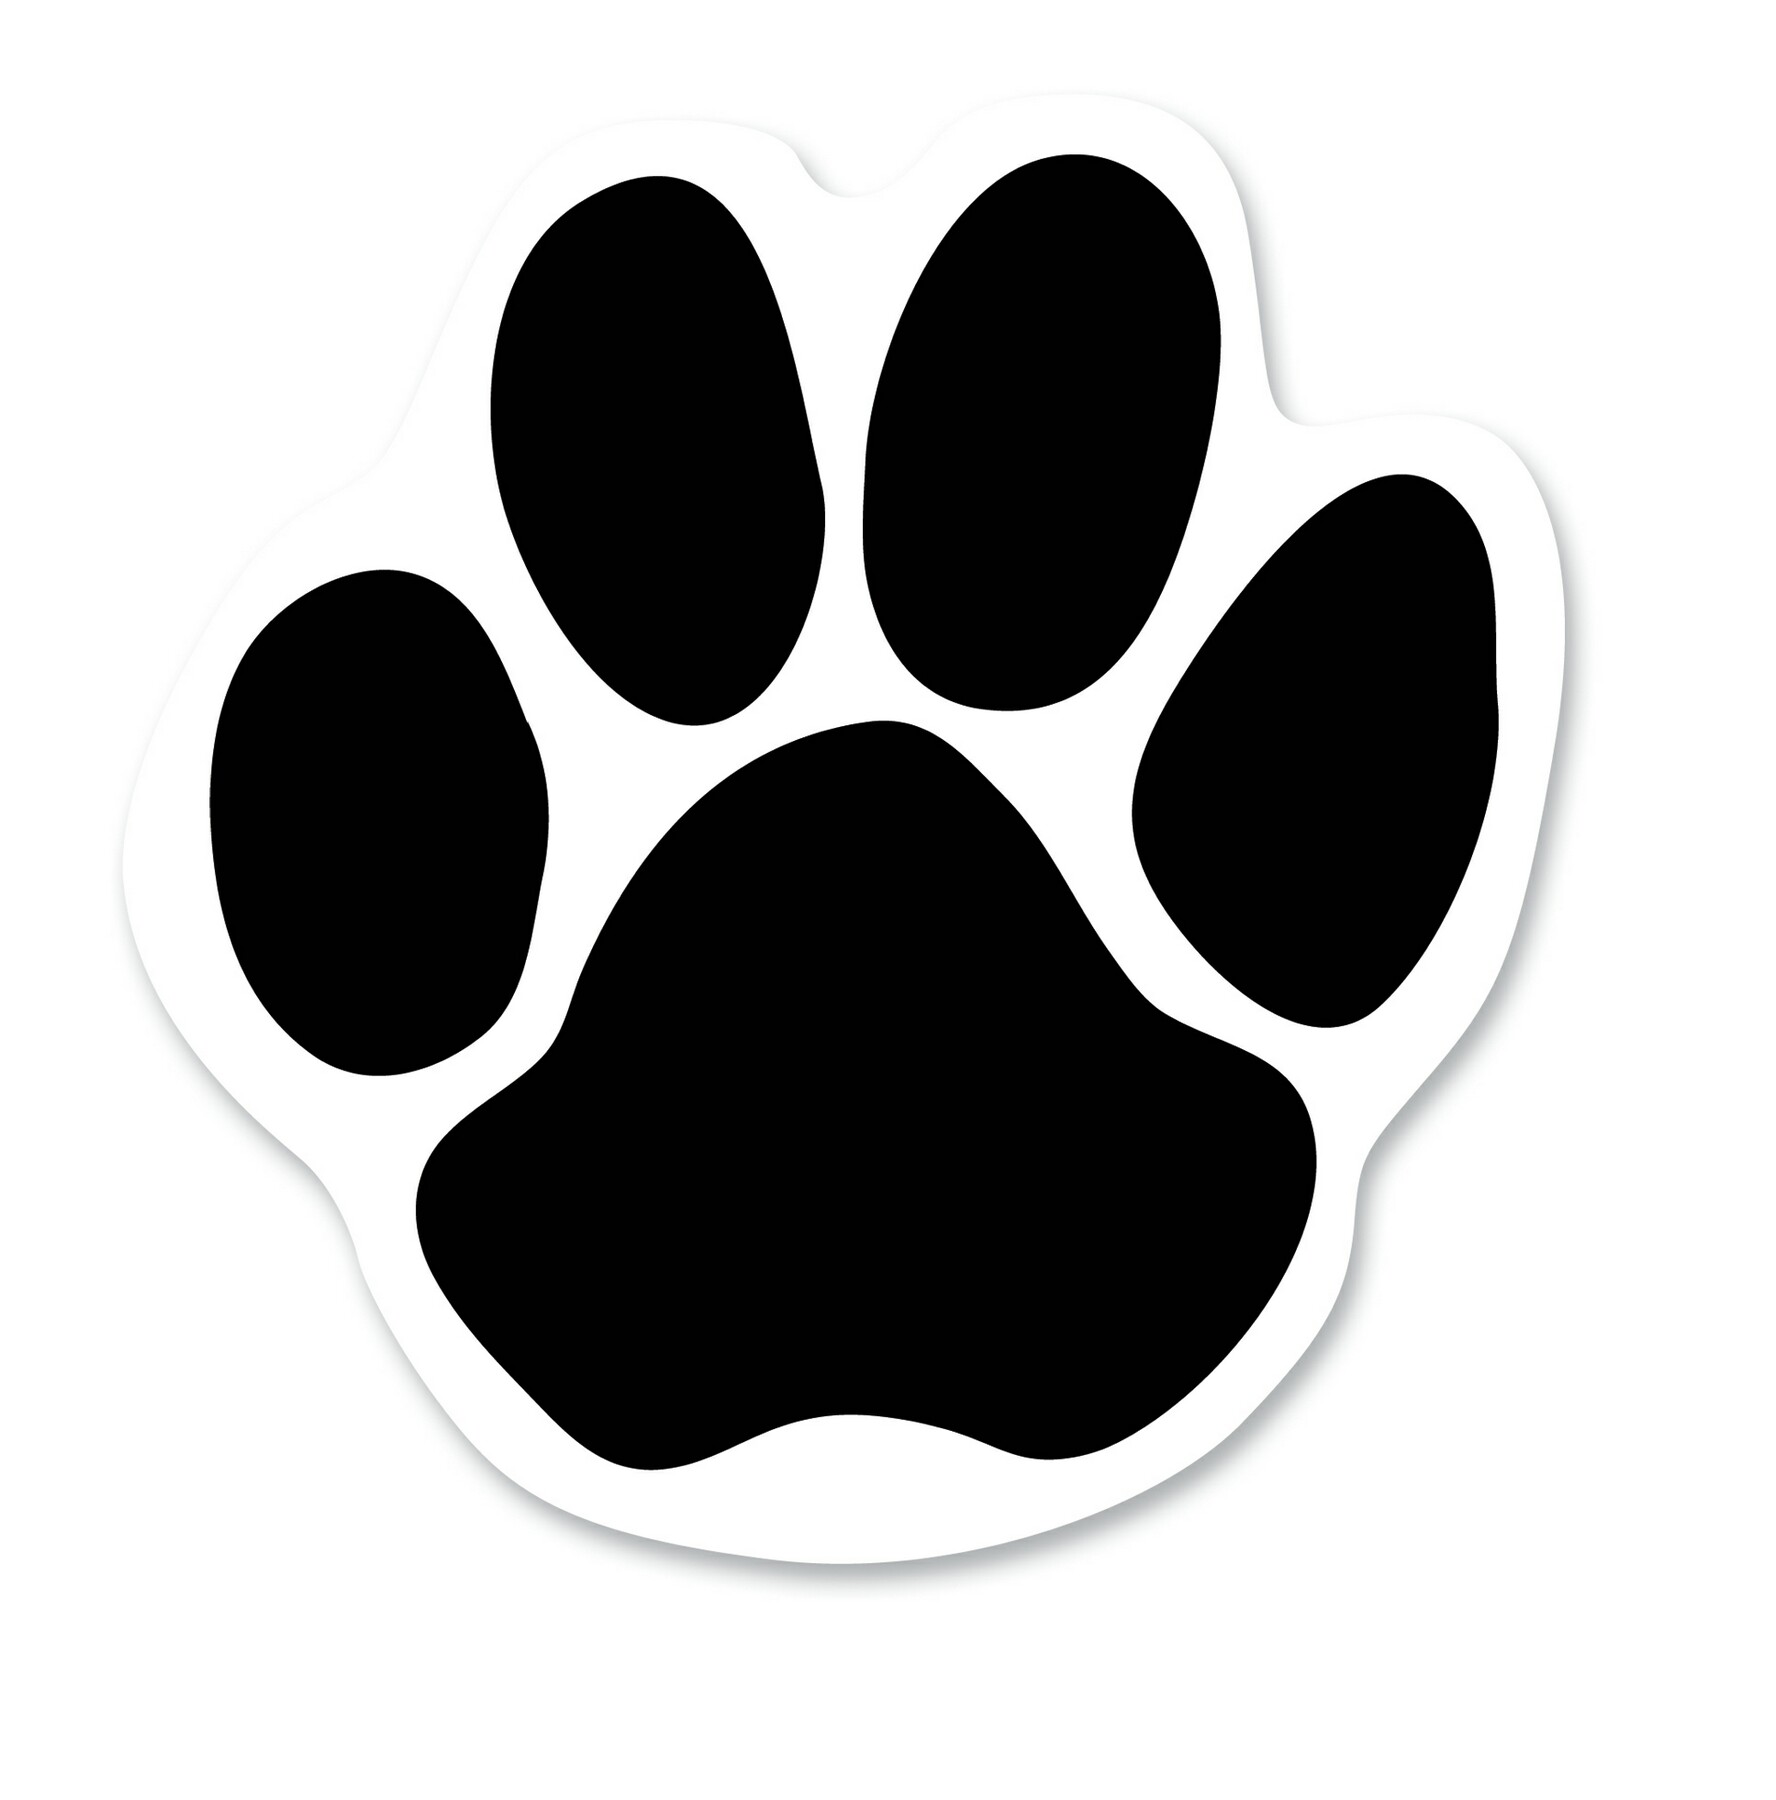 22 Outline Of A Paw Print Free Cliparts That You Can Download To You